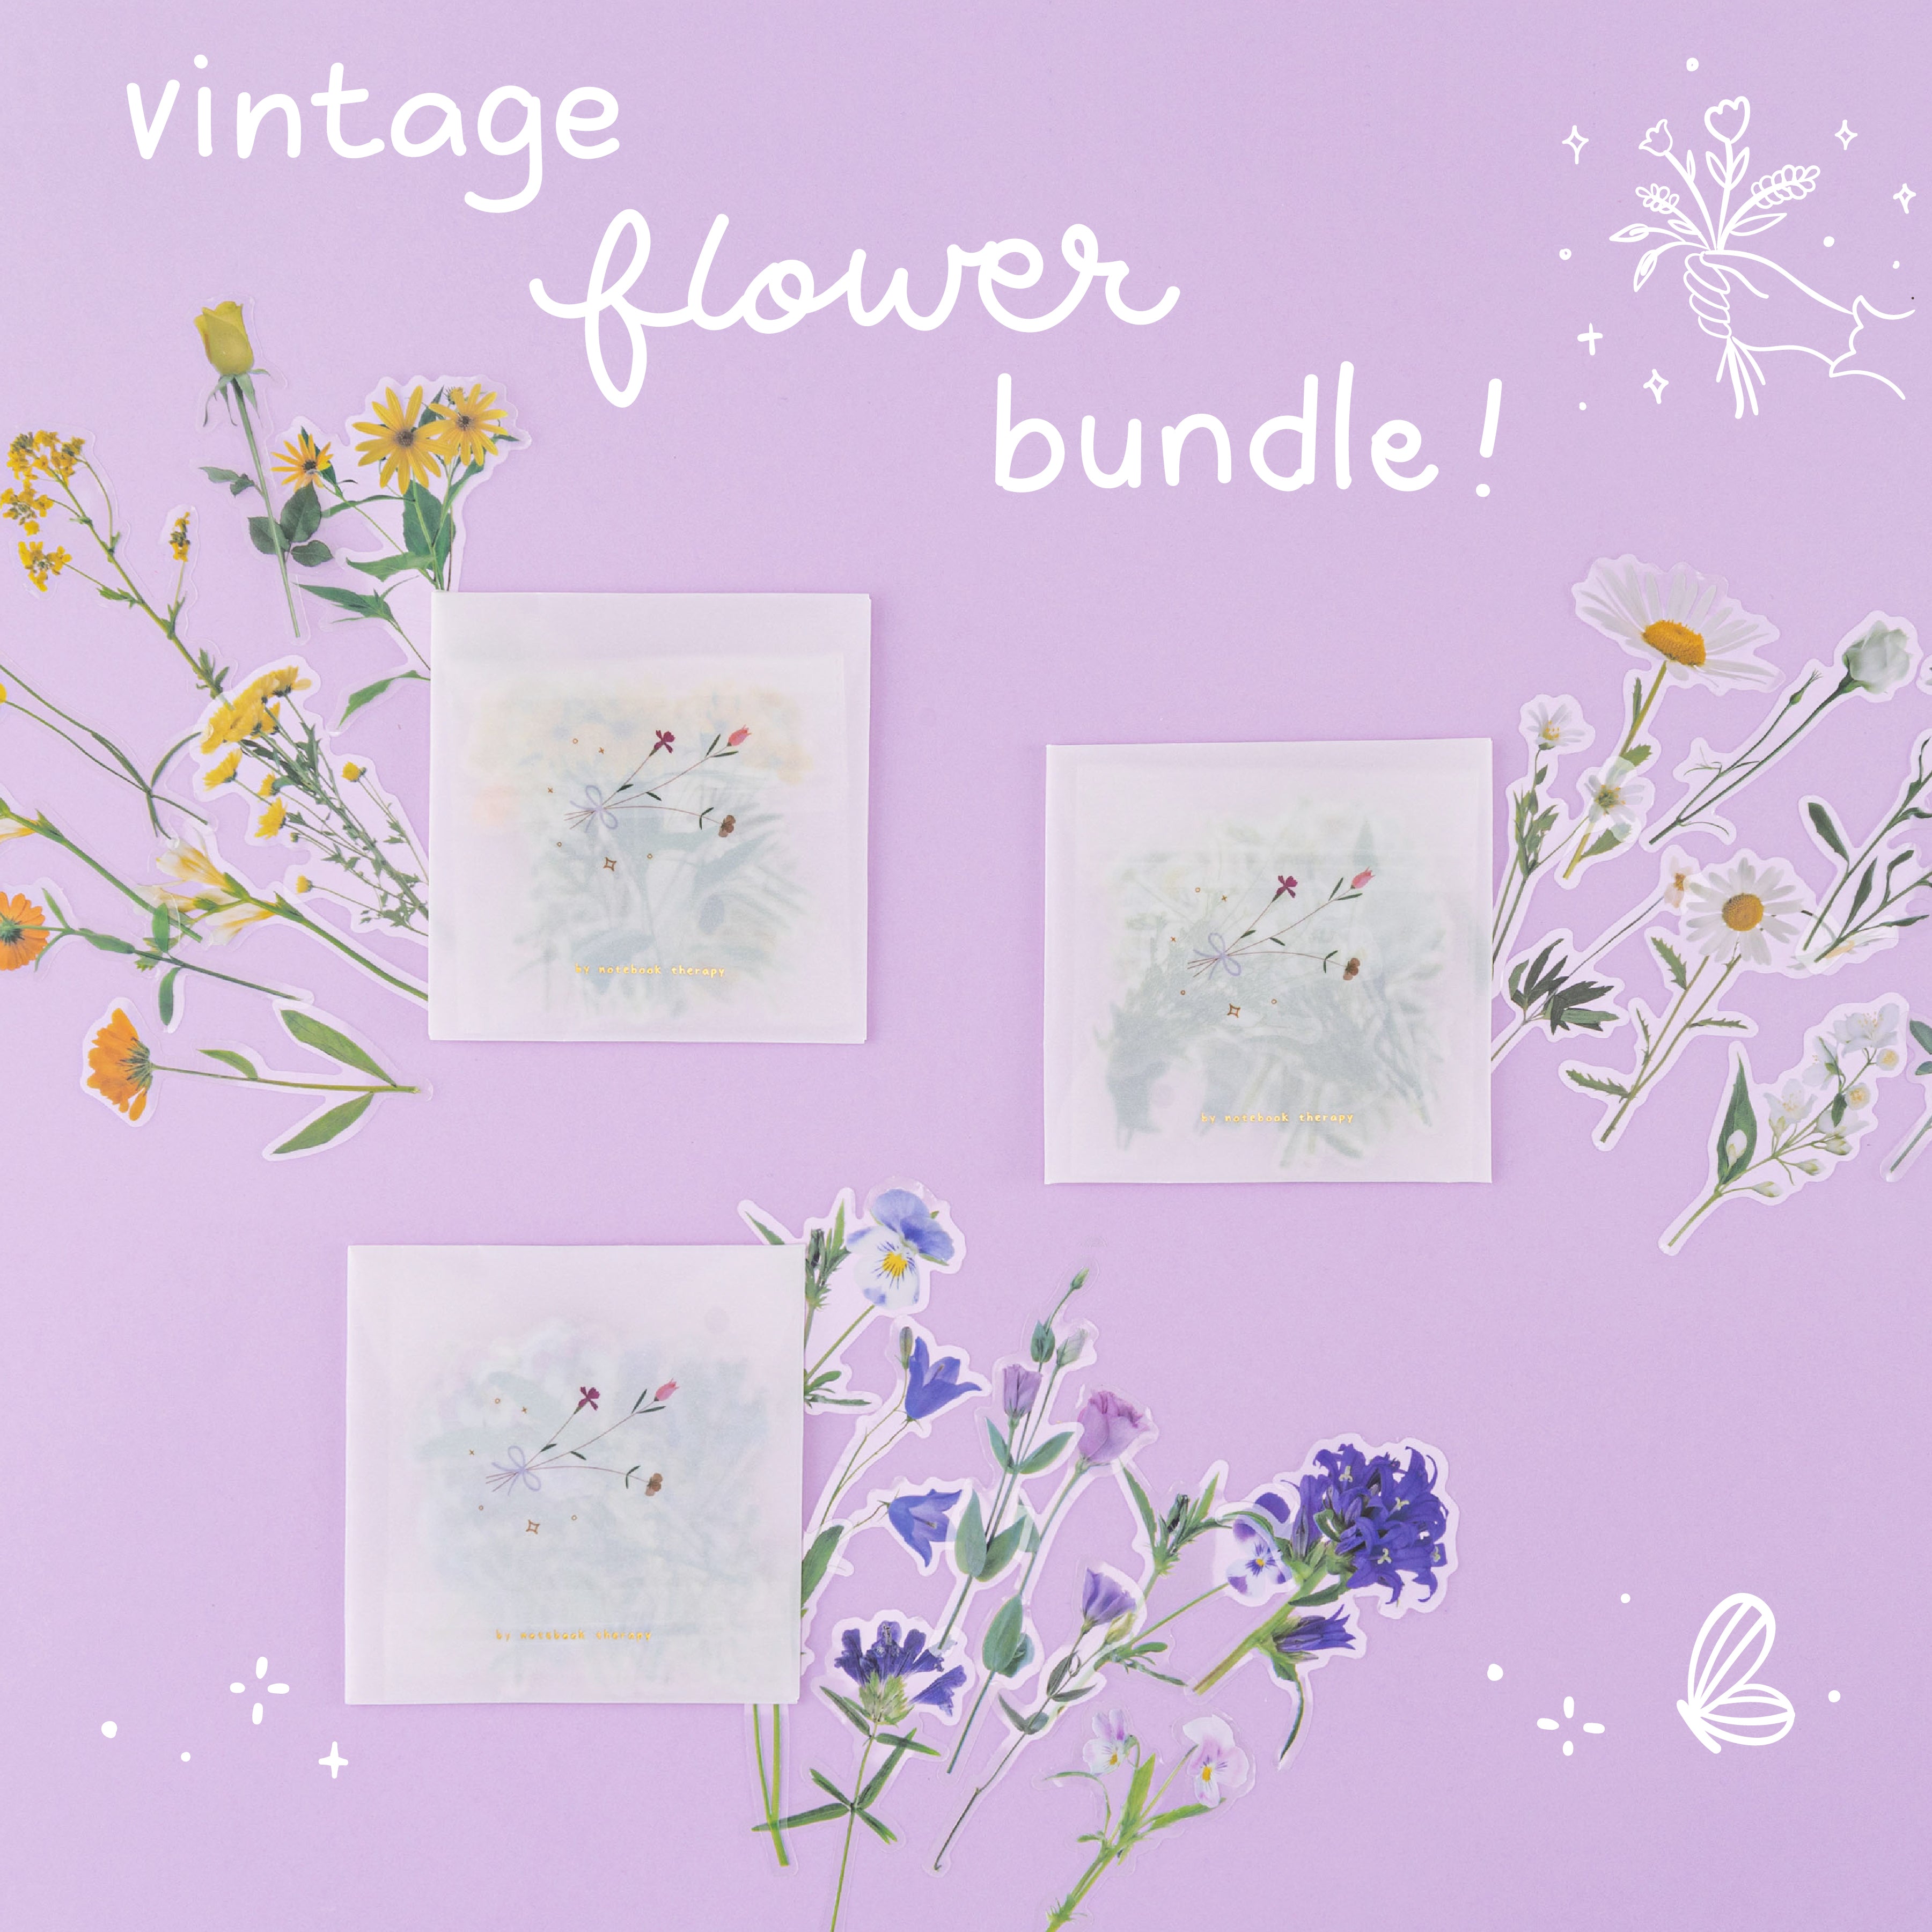 3 packs of pressed flower stickers with lettering “vintage flower bundle” on purple background